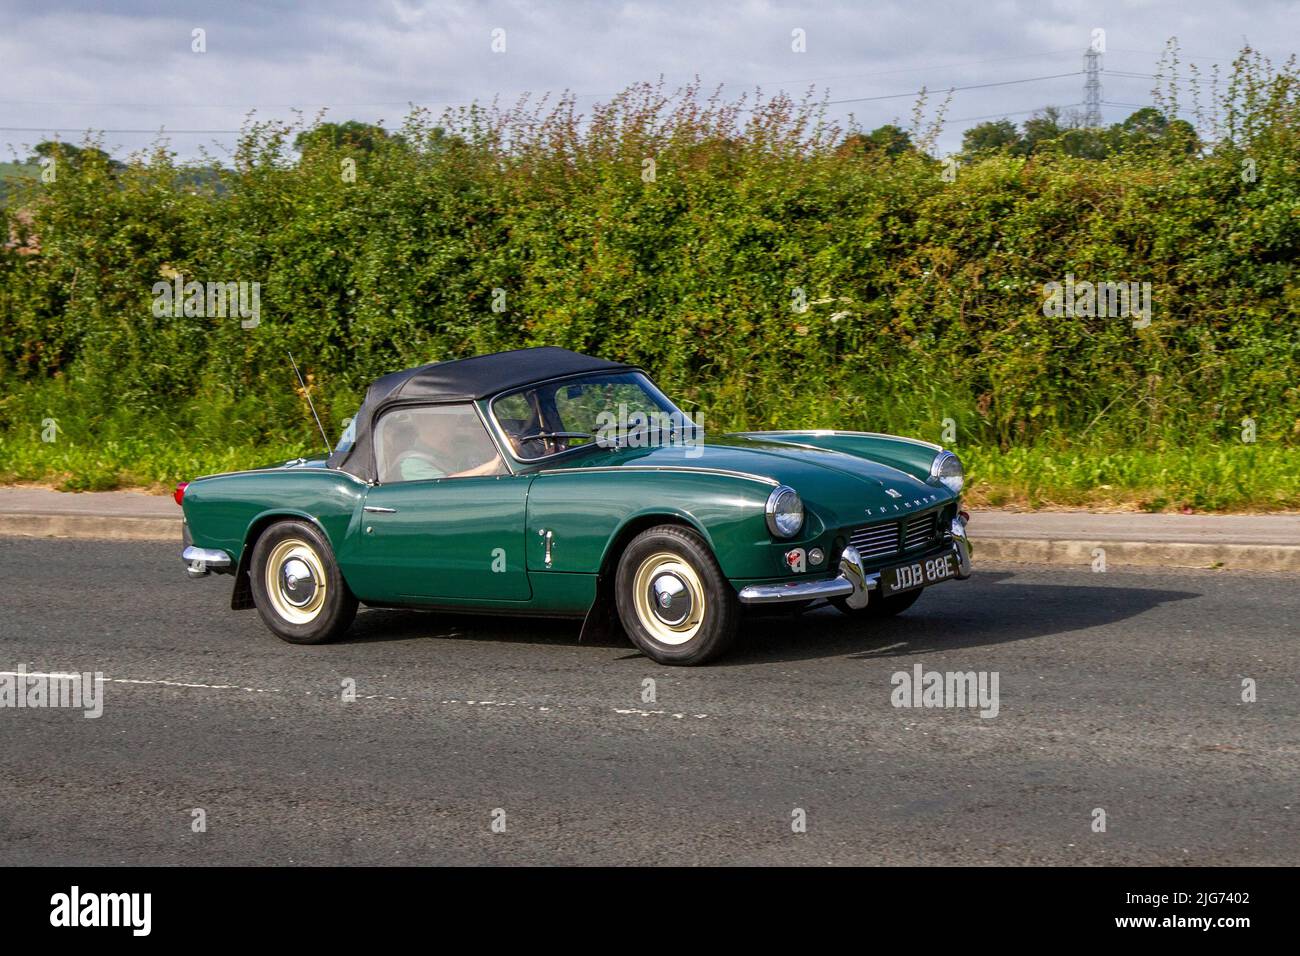 1967 60s sixties green Triumph Spitfire Mk2 1147cc Ptrol sports car; en-route to Hoghton Tower for the Supercar Summer Showtime car meet which is organised by Great British Motor Shows in Preston, UK Stock Photo